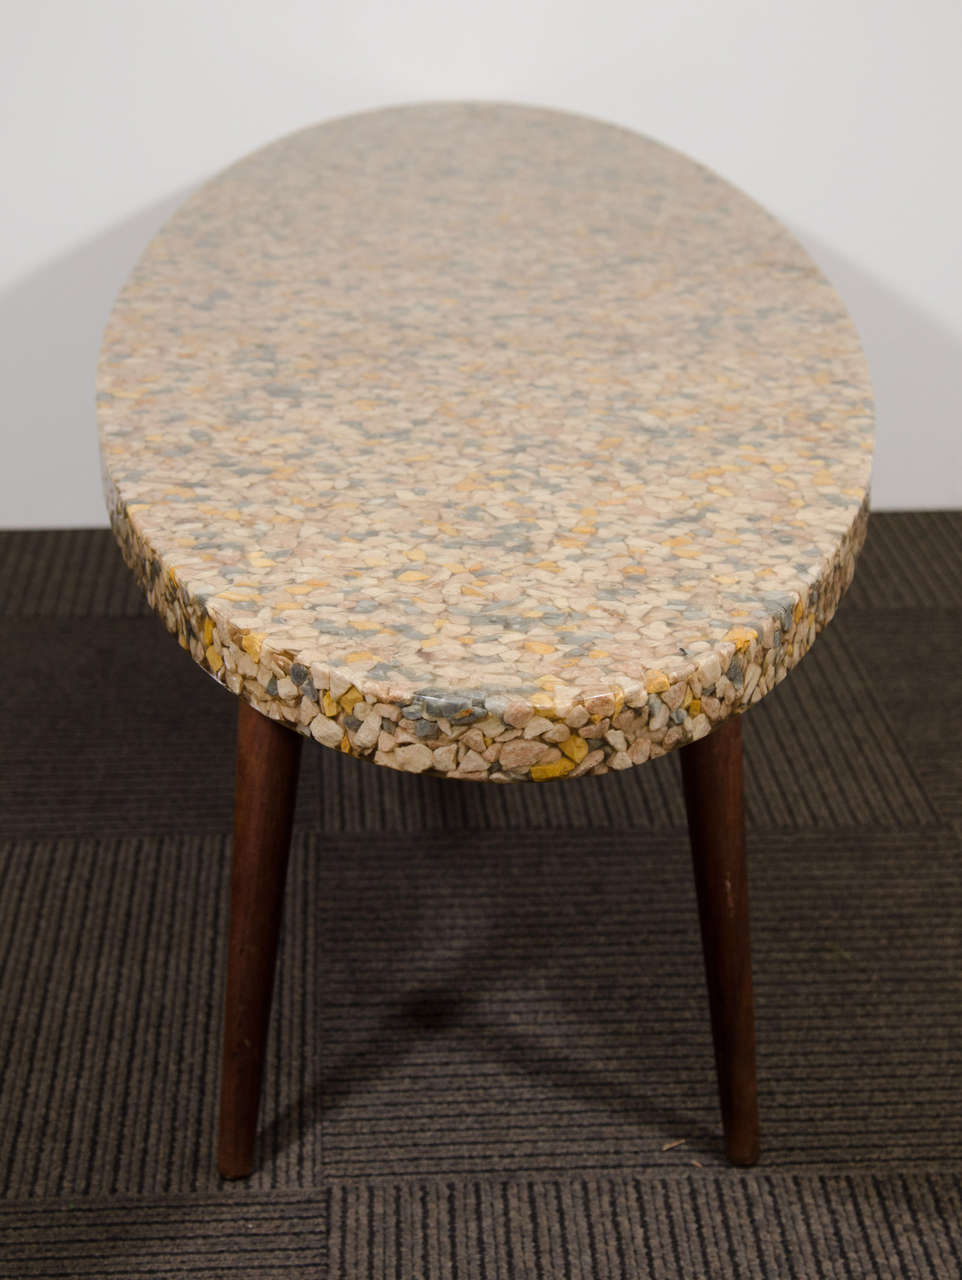 20th Century Midcentury Oval Top Resin Coffee or Cocktail Table with River Pebbles